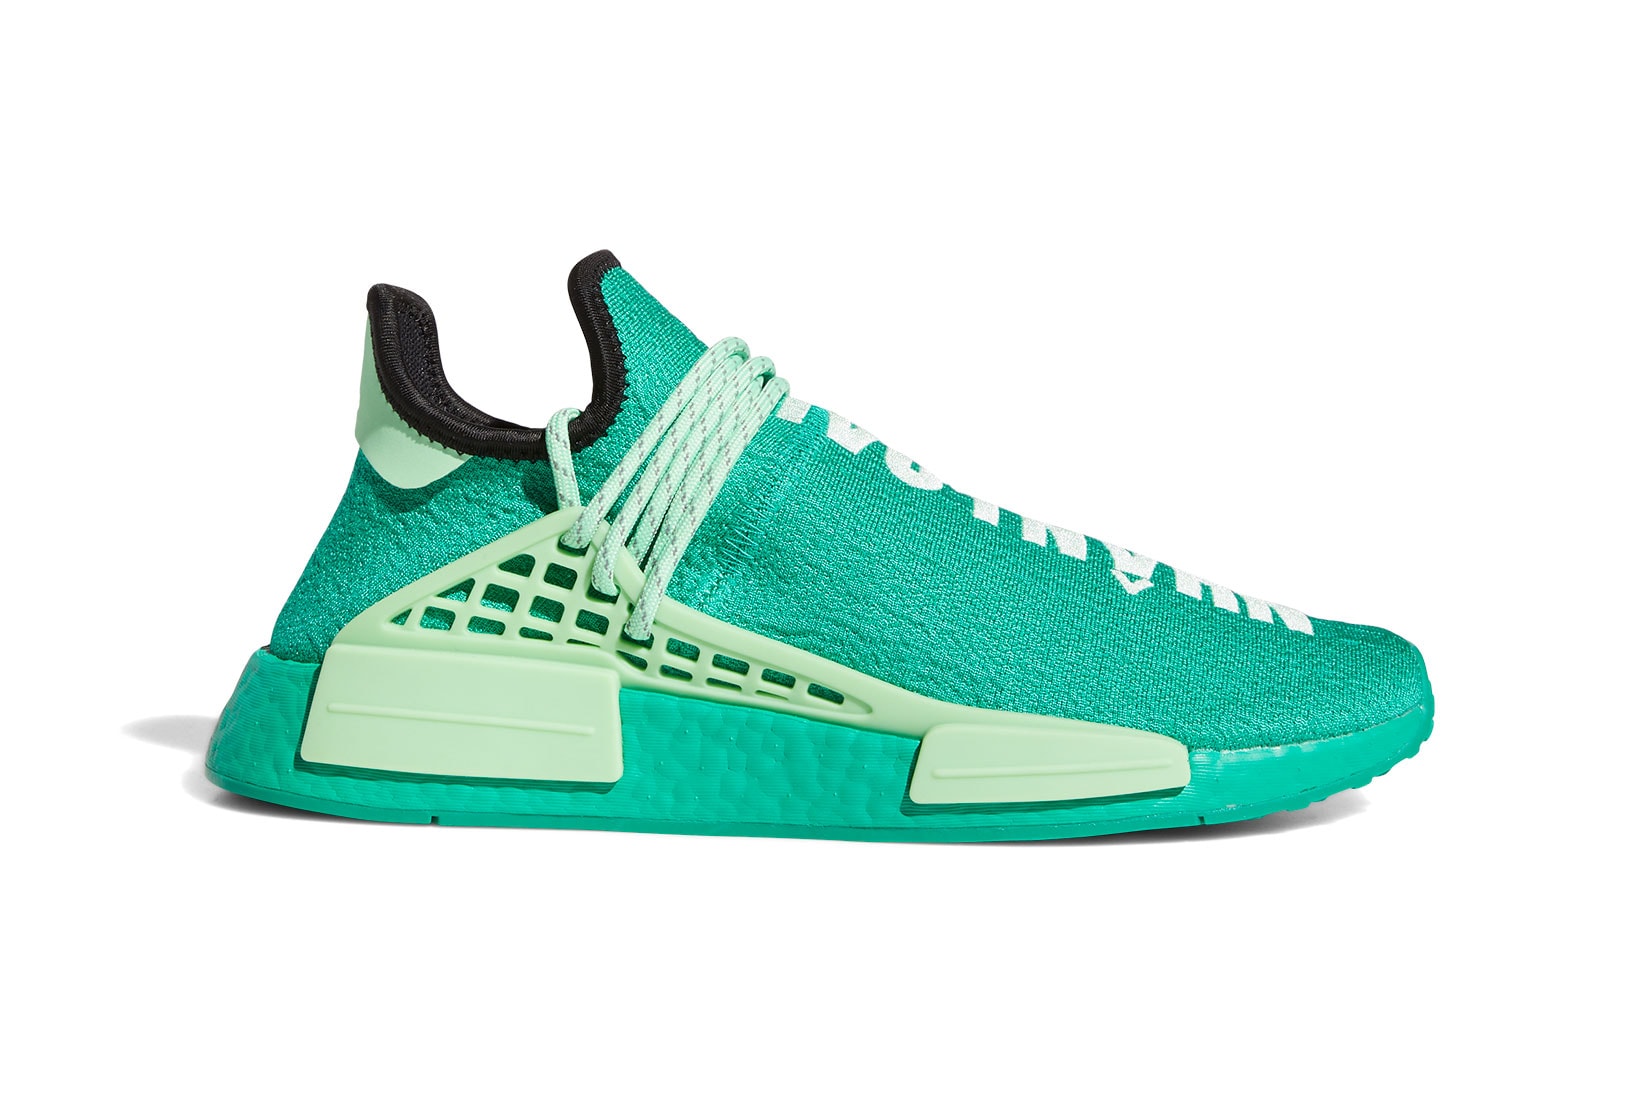 pharrell williams adidas originals pw hu nmd collaboration sneakers mint green new colorway sneakerhead footwear shoes 